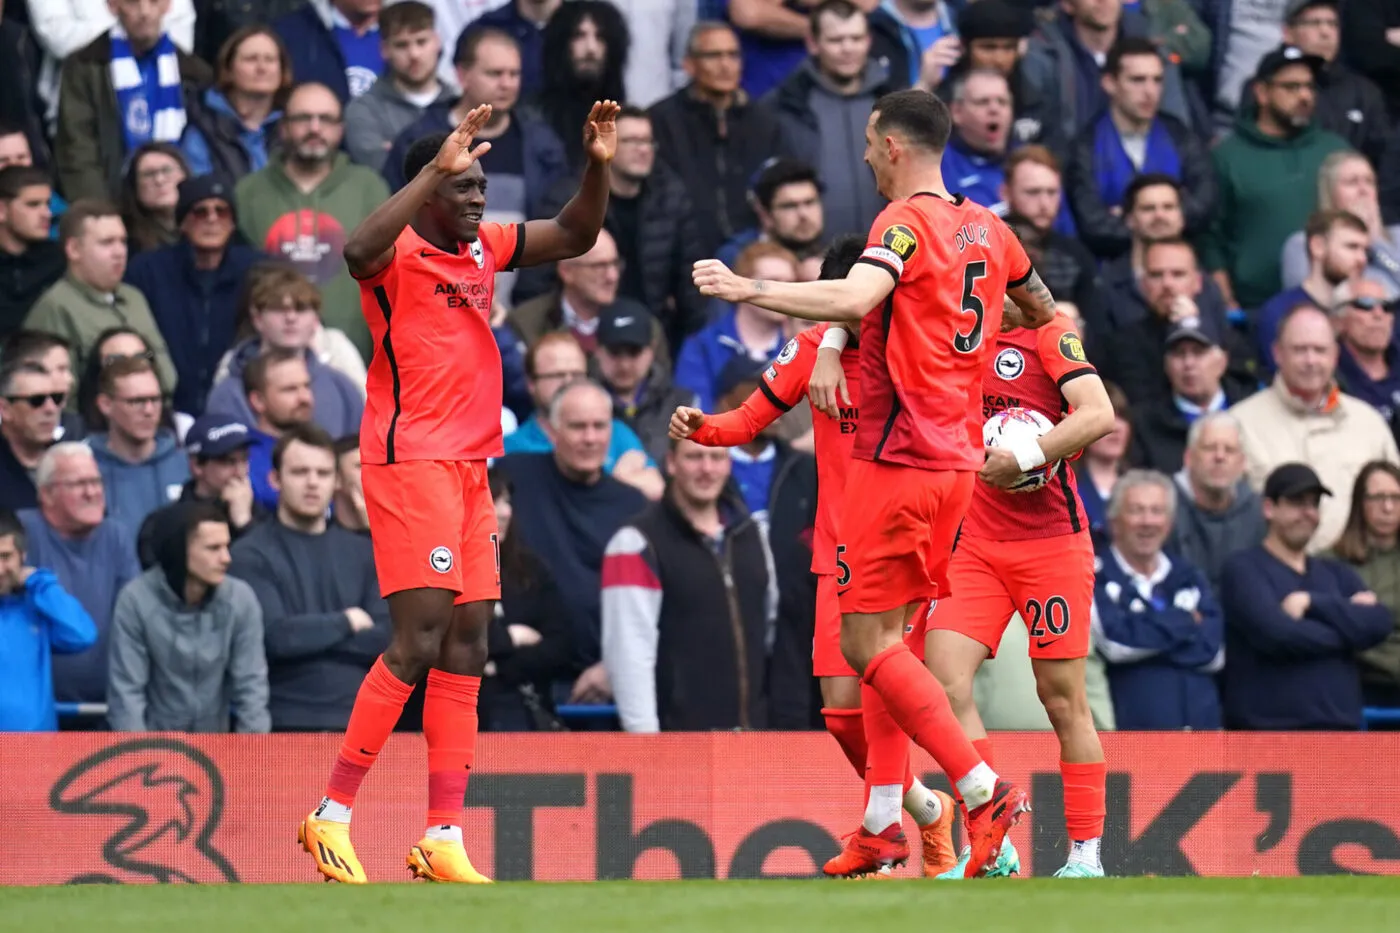 Brighton and Hove Albion's Danny Welbeck (left) celebrates scoring their side's first goal of the game with team-mates during the Premier League match at Stamford Bridge, London. Picture date: Saturday April 15, 2023. - Photo by Icon sport